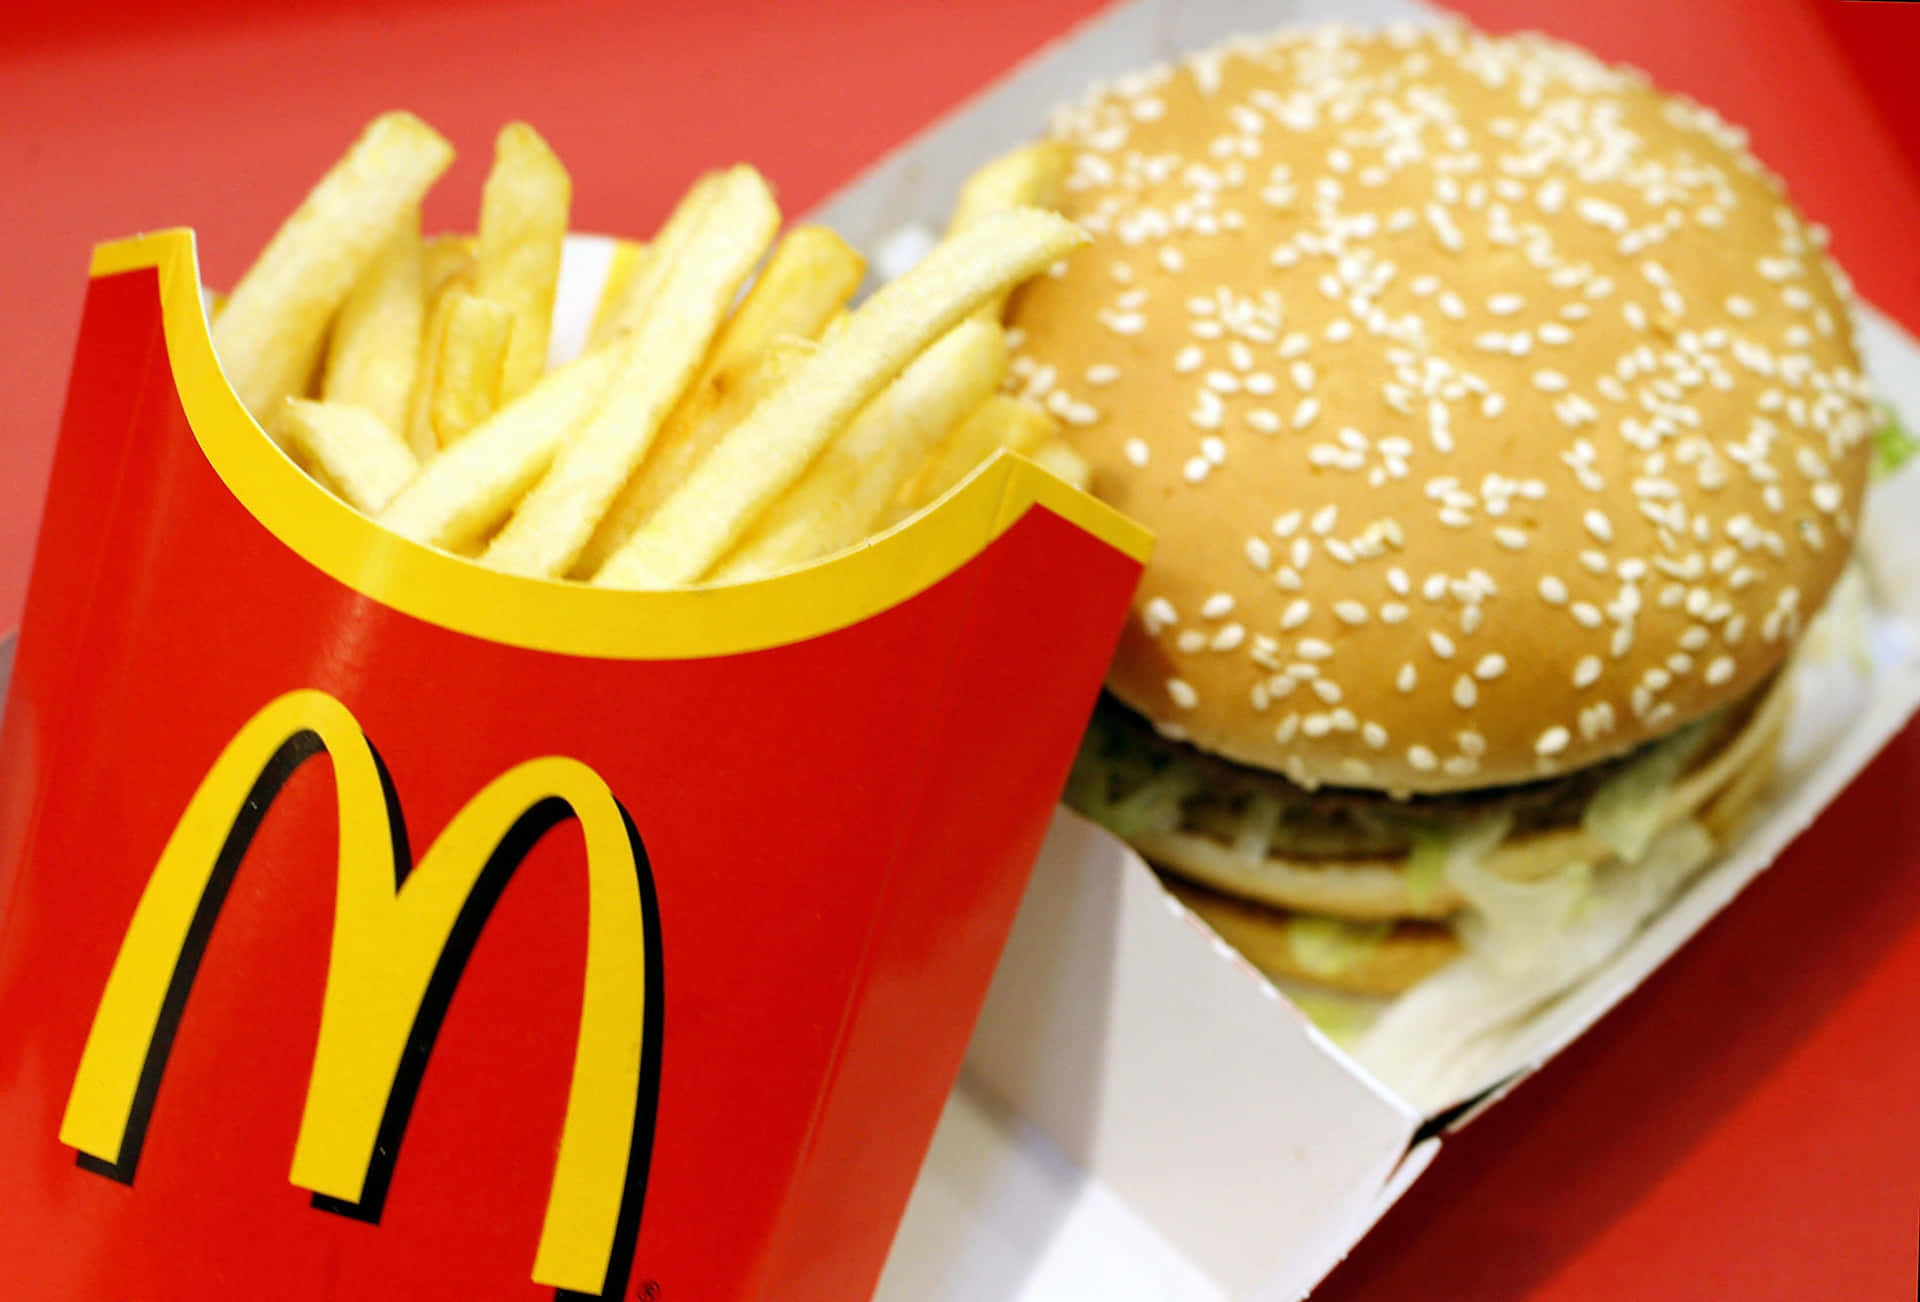 A Mcdonald's Hamburger And French Fries Are Shown